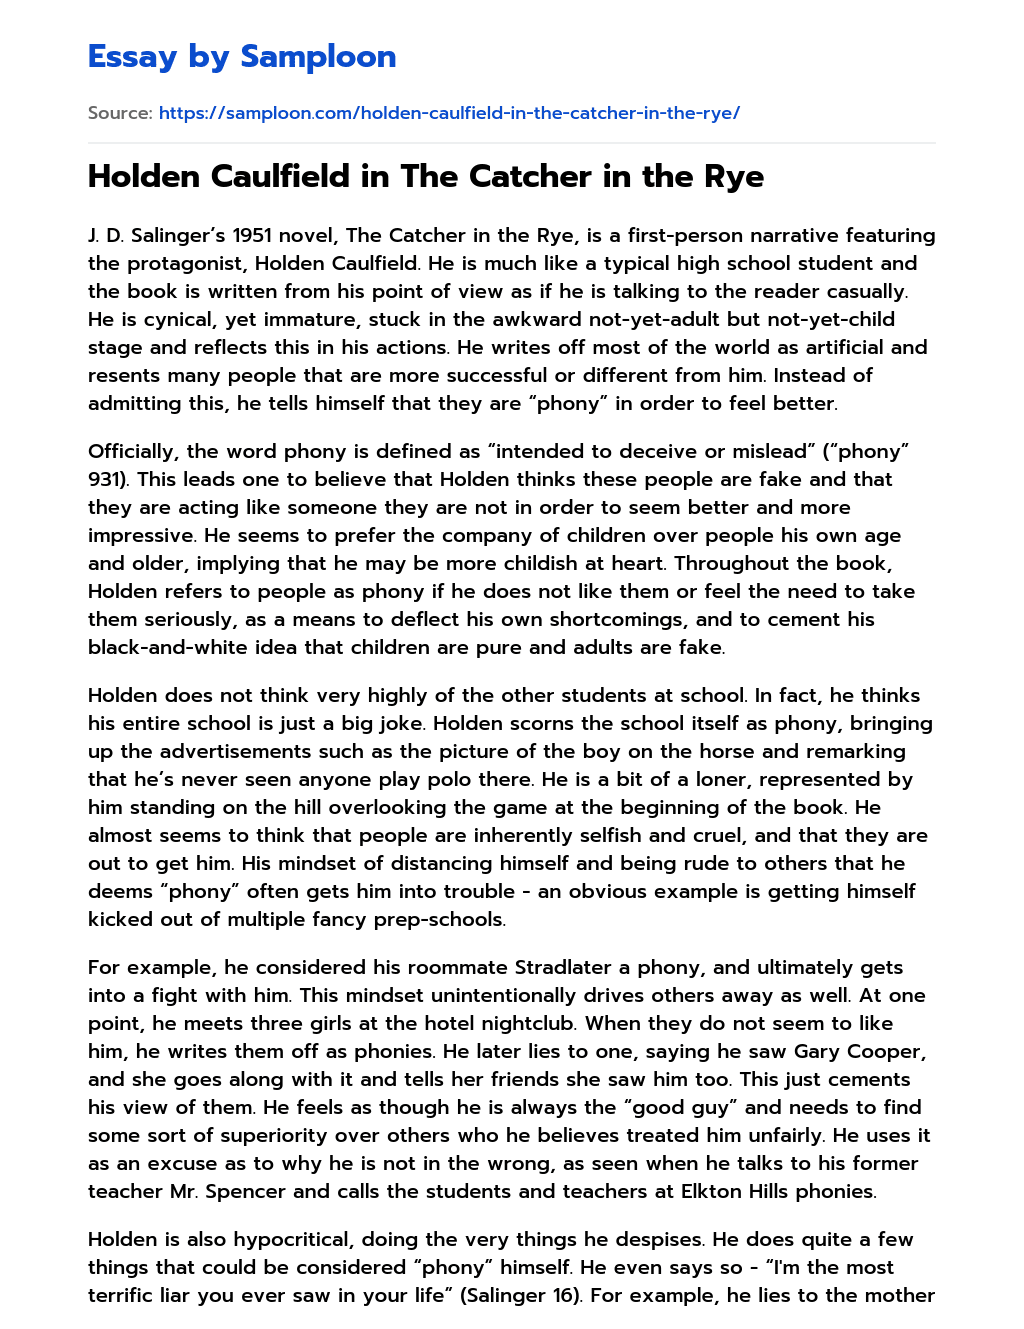 Holden Caulfield in The Catcher in the Rye essay